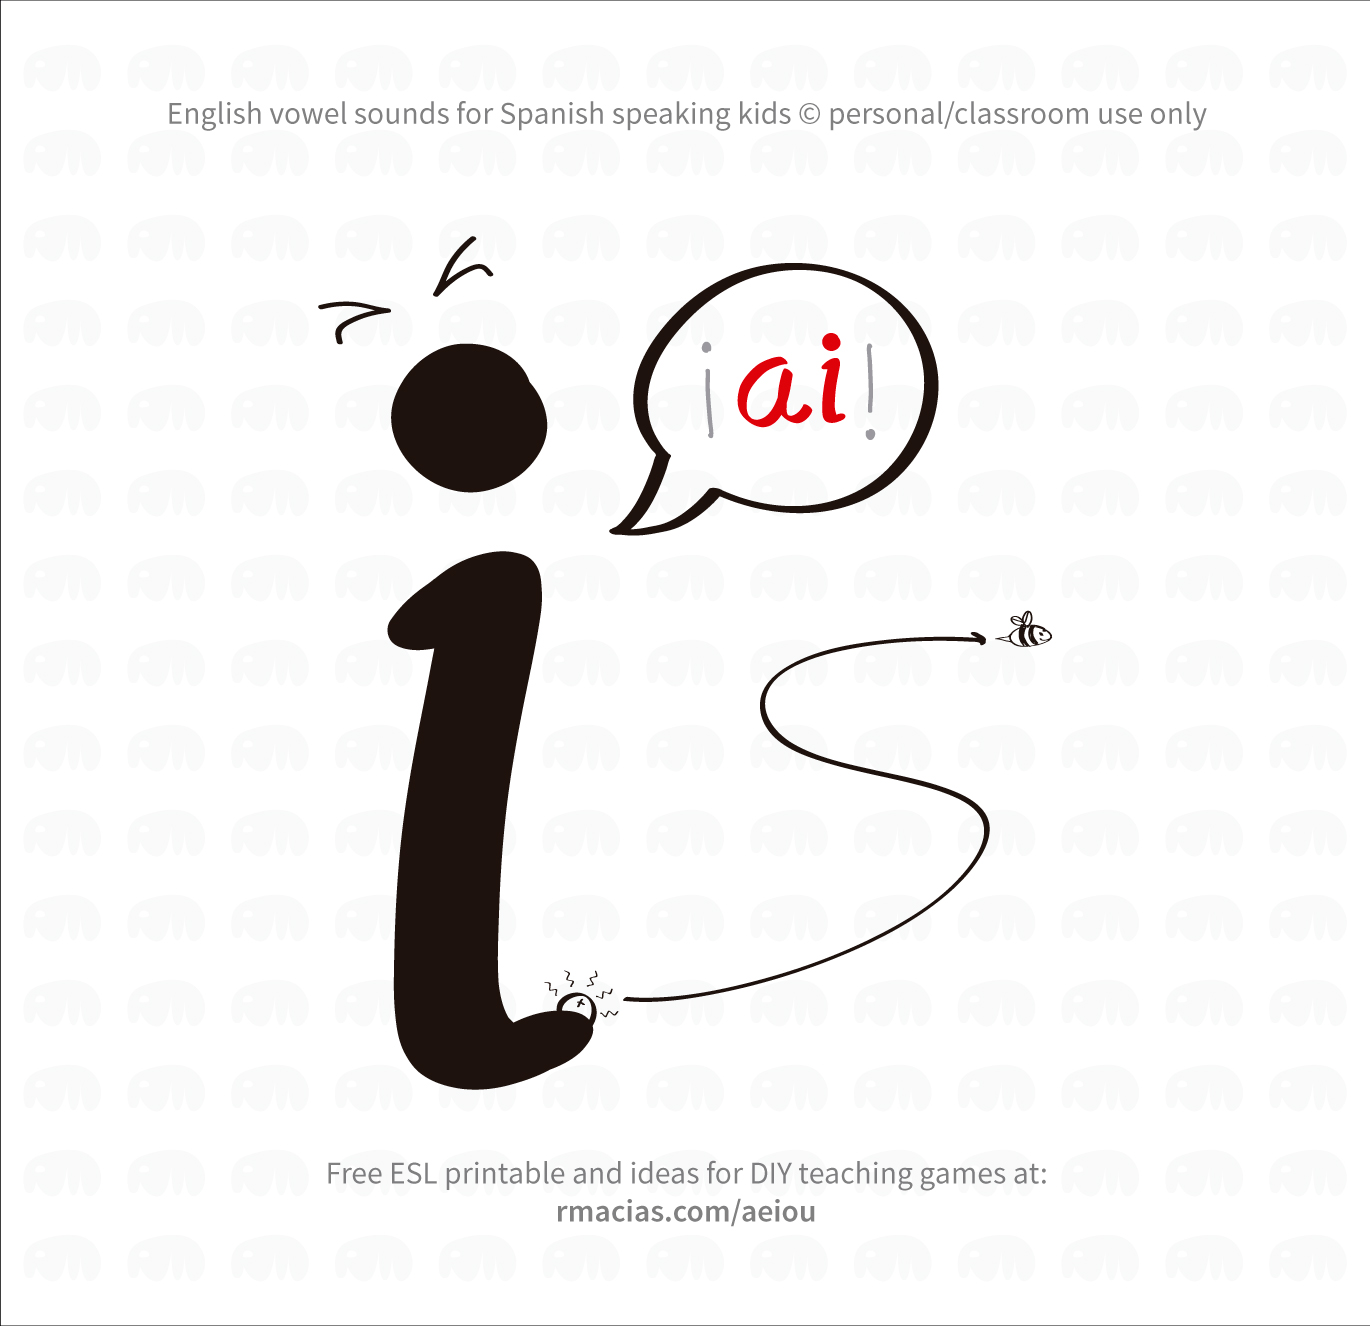 Funny vowels illustrations for teaching in a humorous way English vowels names to Spanish-speakers, using expressions that are already familiar to Spanish-speaking students. I made them using the Spanish from LatinAmerica - Mexico ?? A - ¡ei! (letter "a" is yelling at someone that wants to steal a cookie) E - ¡iii! (letter "e" is playing on a swing) I - ¡ai! (letter "I" is getting stung by a bee) O - ou (letter "o" has dropped its ice cream on the floor) U - iu (letter "u" is disgusted by a poo on the floor)